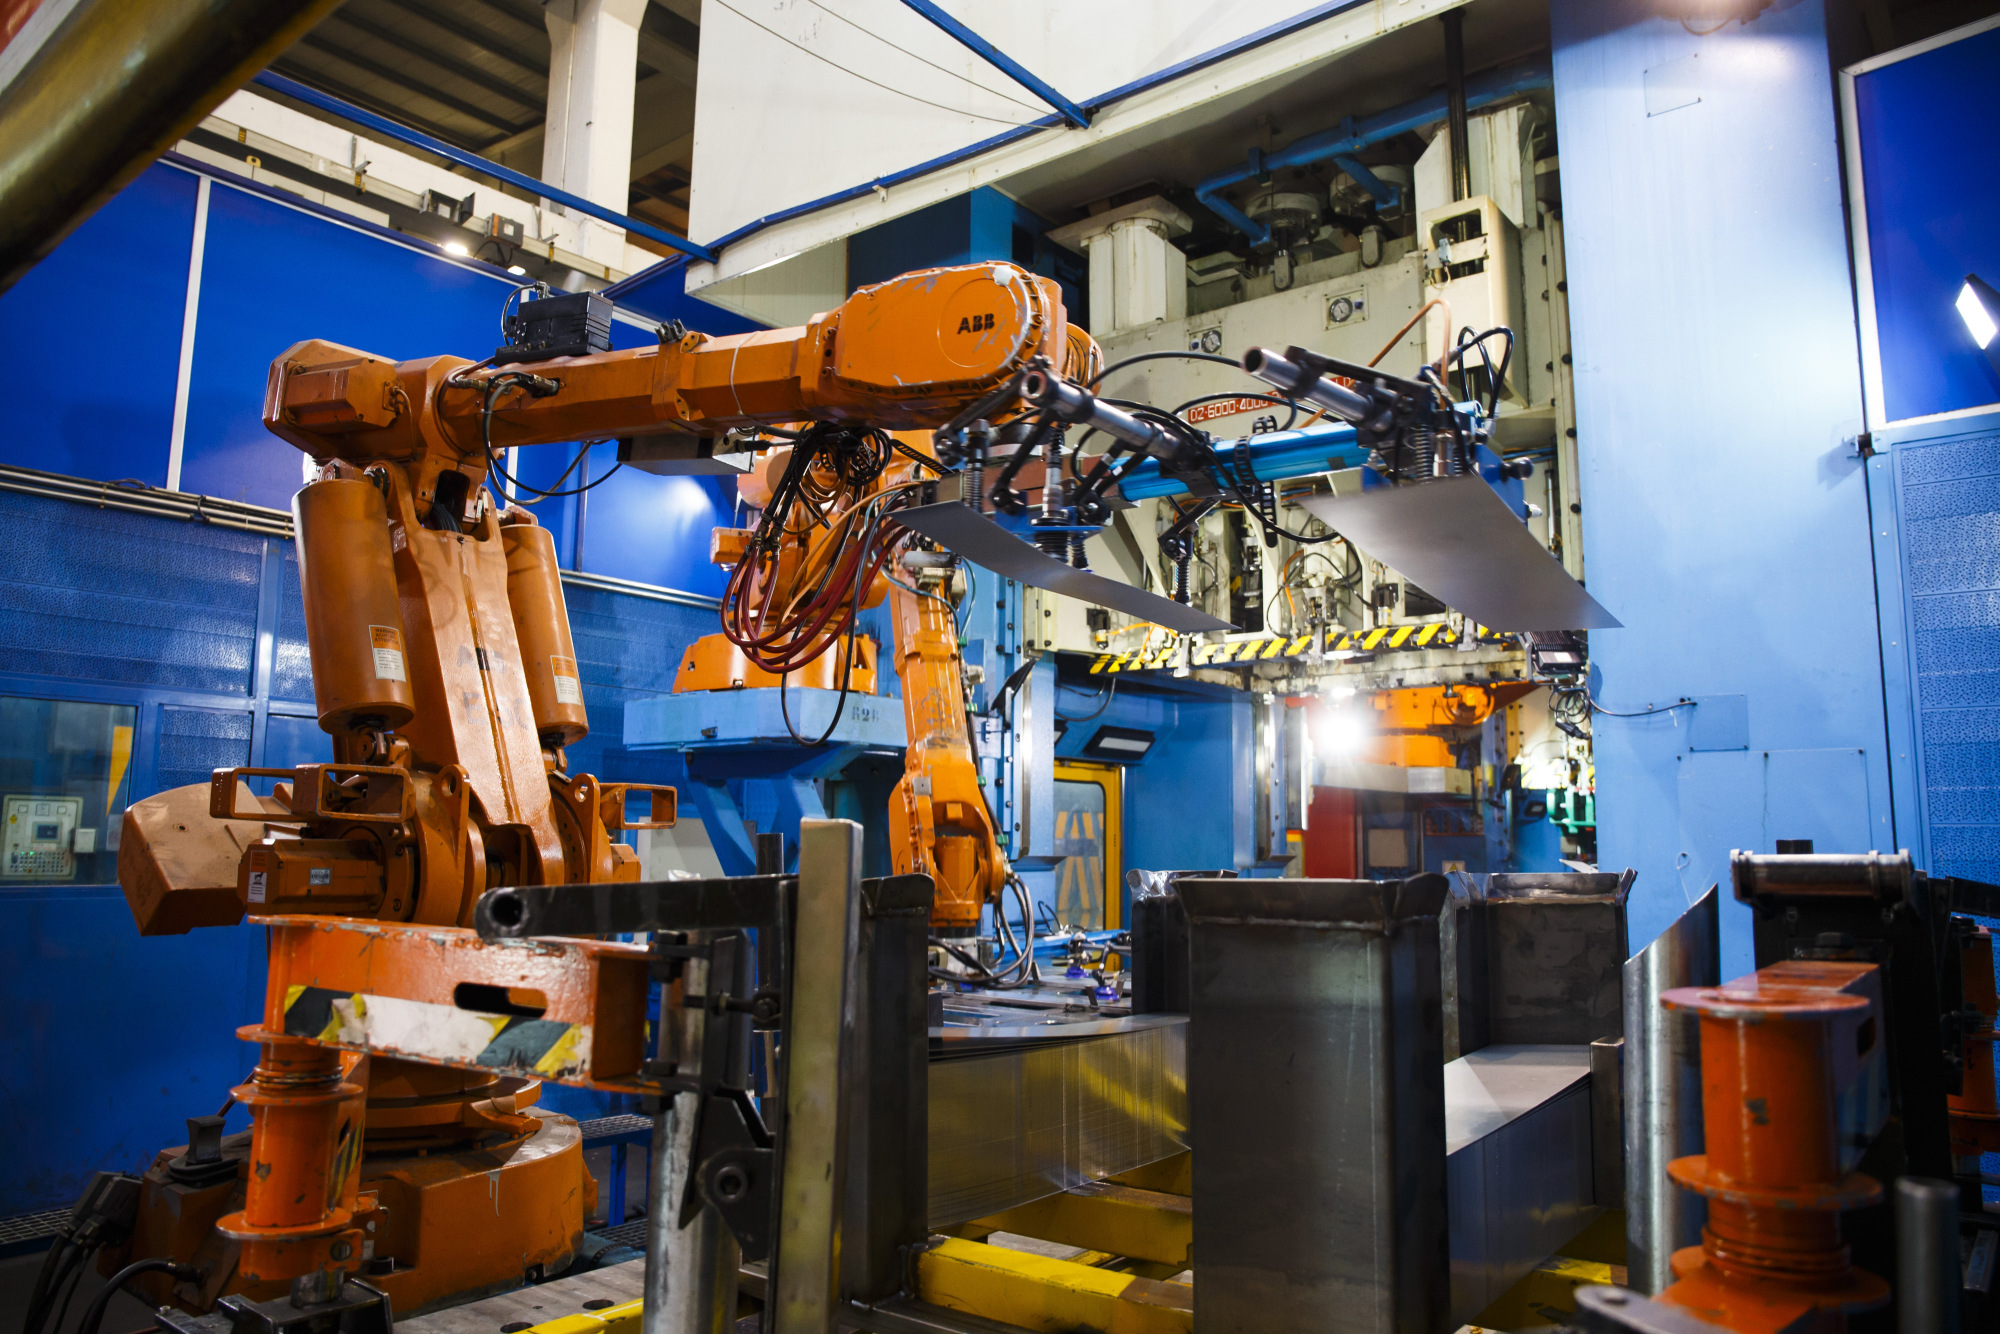 ABB Ltd. robotic arms position steel sheets for stamping auto parts in Spain.